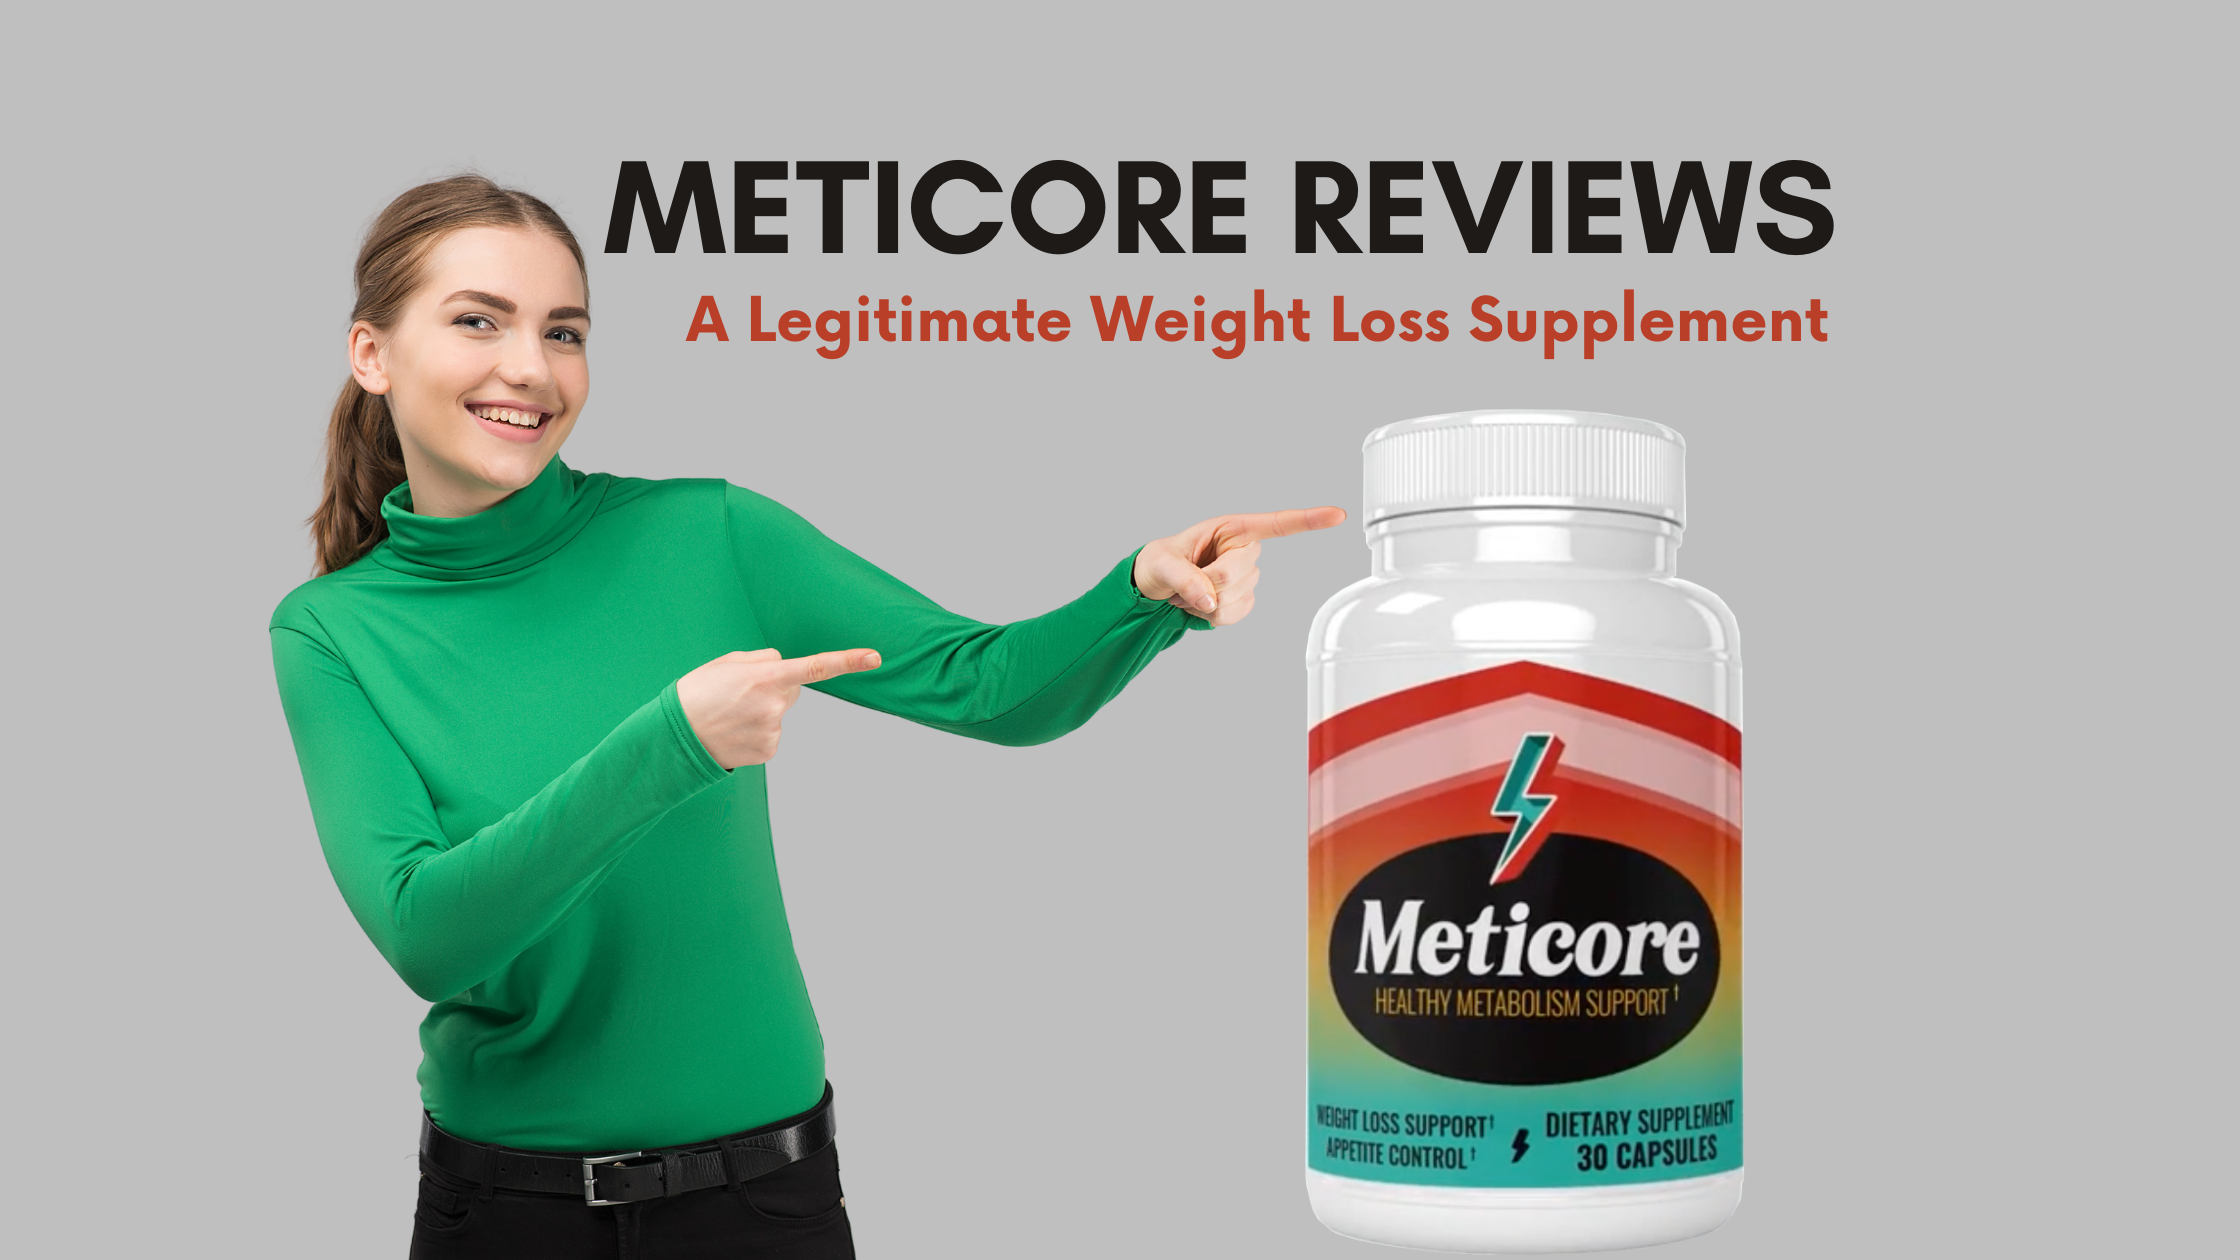 Meticore Reviews - A Legitimate Weight Loss Supplement